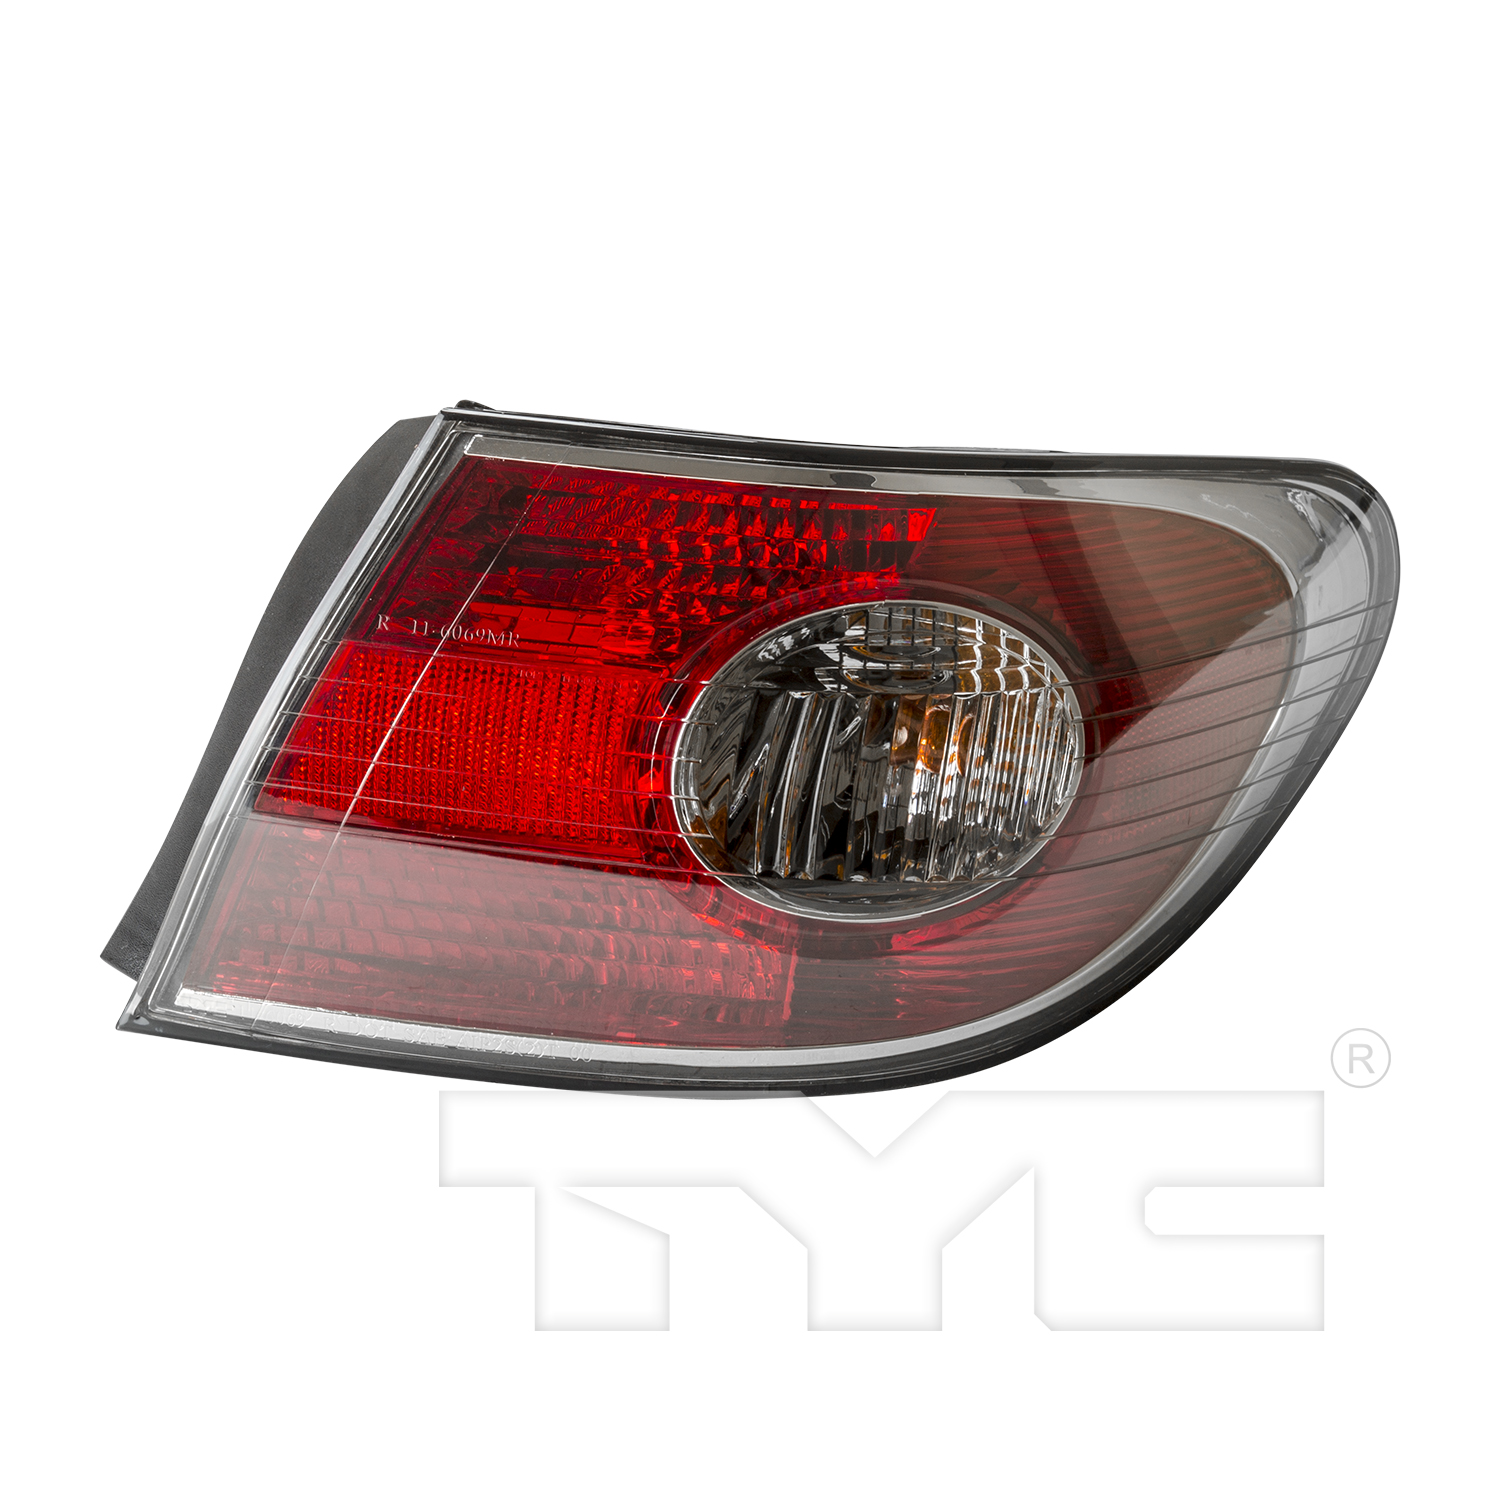 Aftermarket TAILLIGHTS for LEXUS - ES300, ES300,02-03,RT Taillamp assy